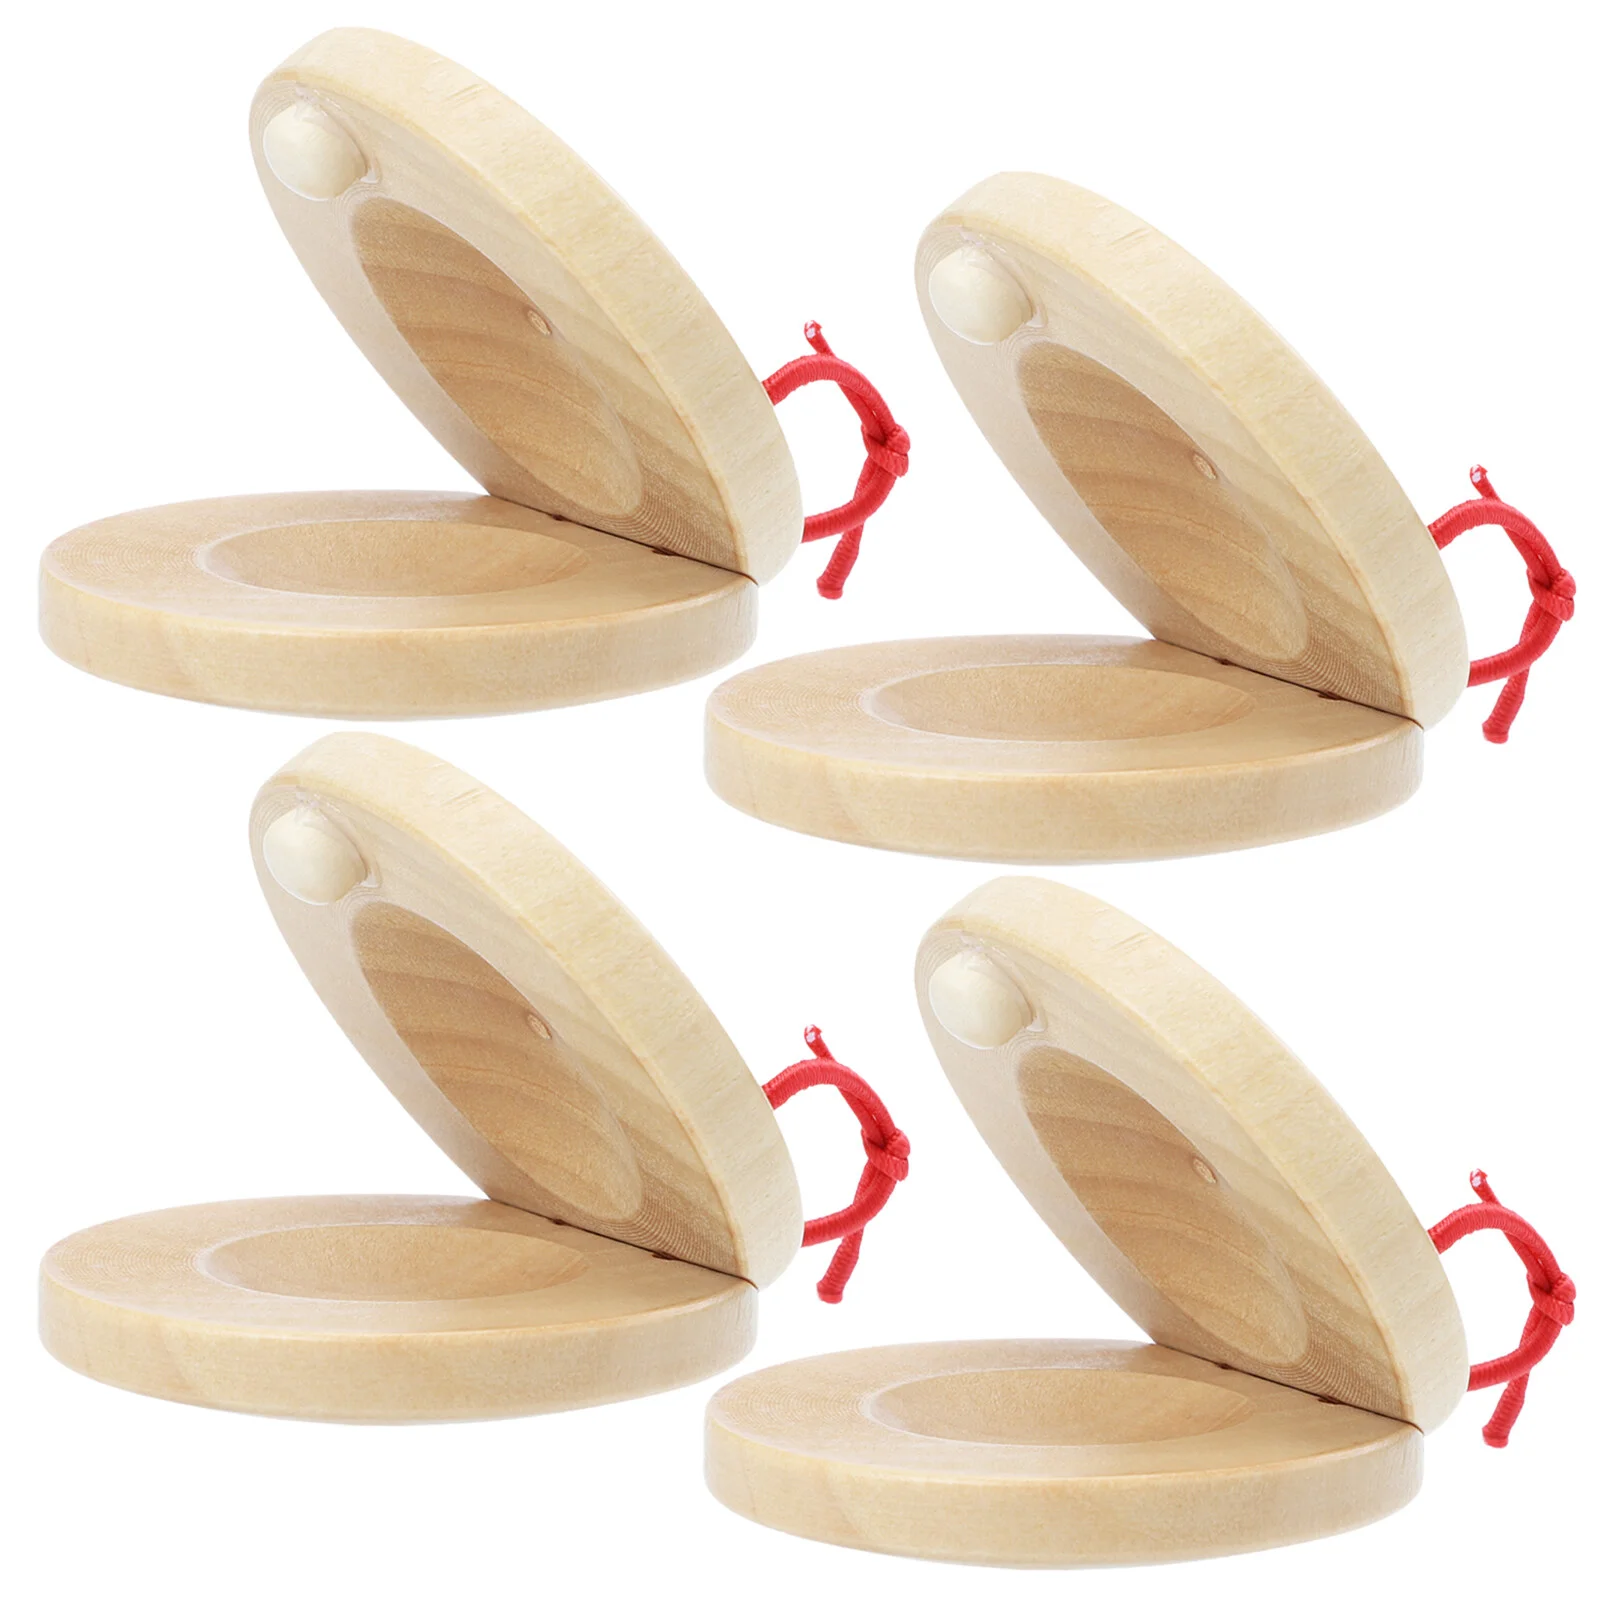 

4 Pcs Castanets Music Education Toy Baby Wooden Toys Bulk Kids Musical Instruments Children's Percussion Plaything Small